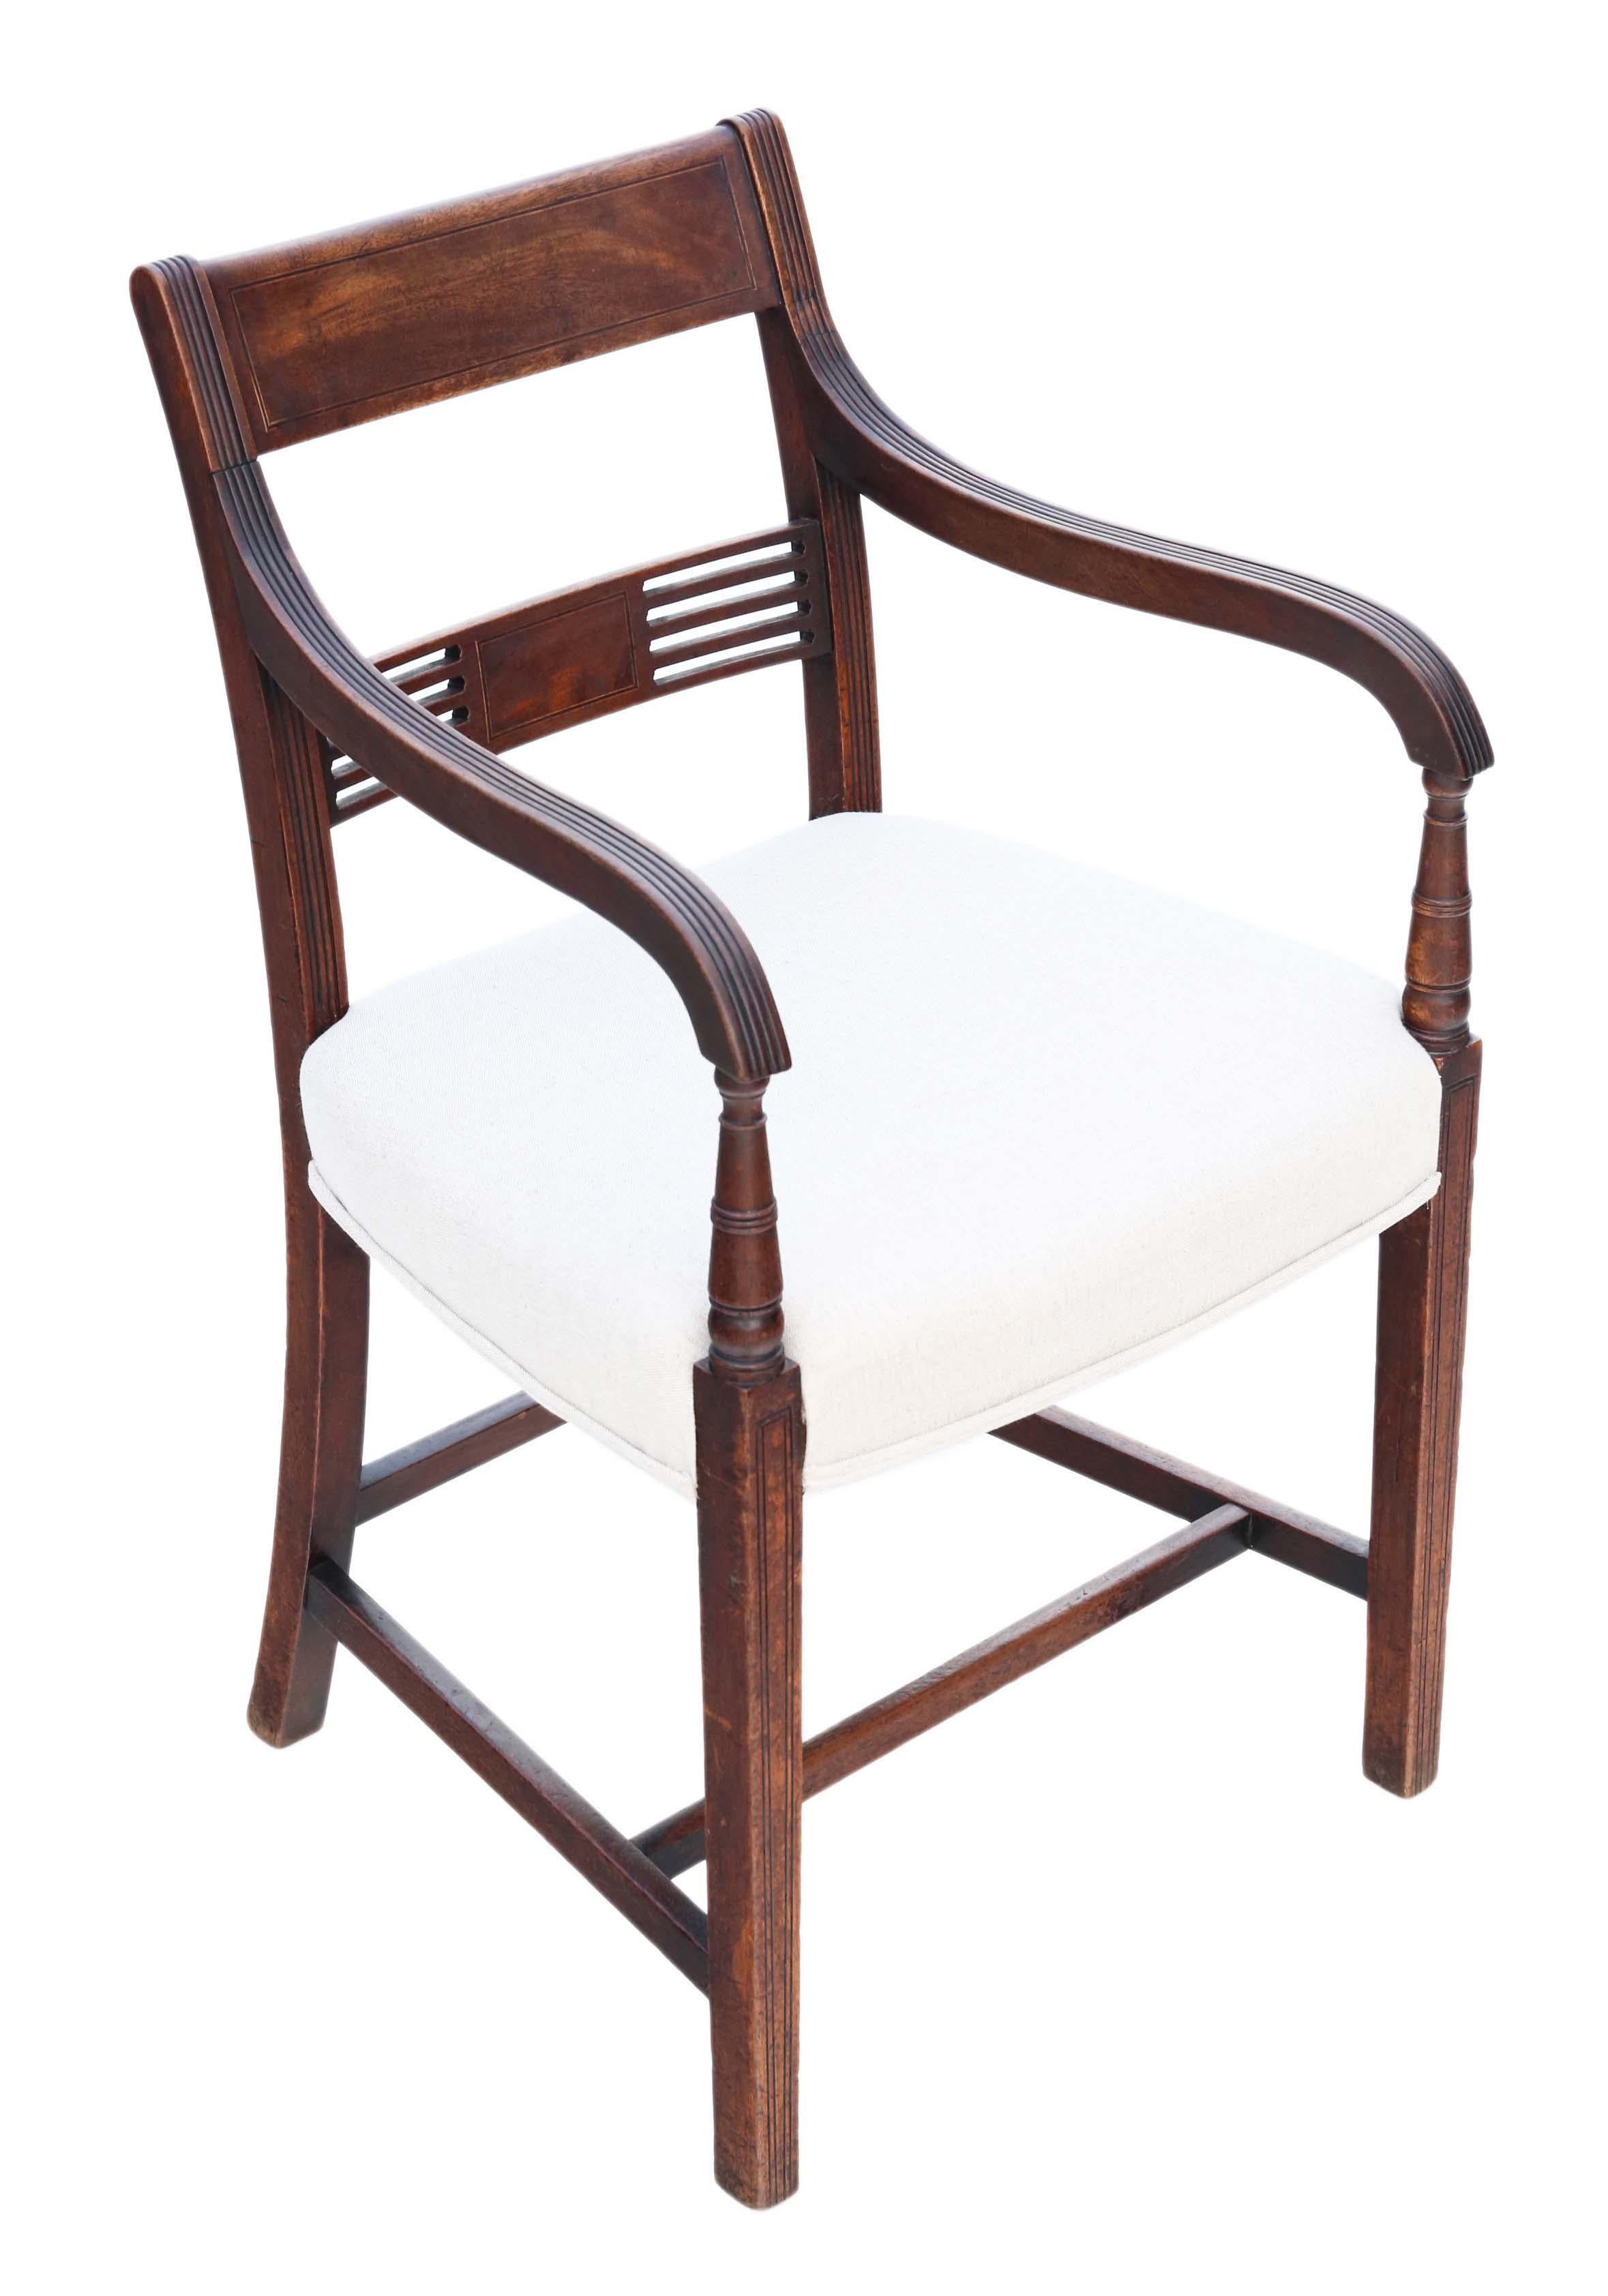 Early 19th Century Antique Set of 8 '6+2' Georgian circa 1820 Inlaid Mahogany Dining Chairs